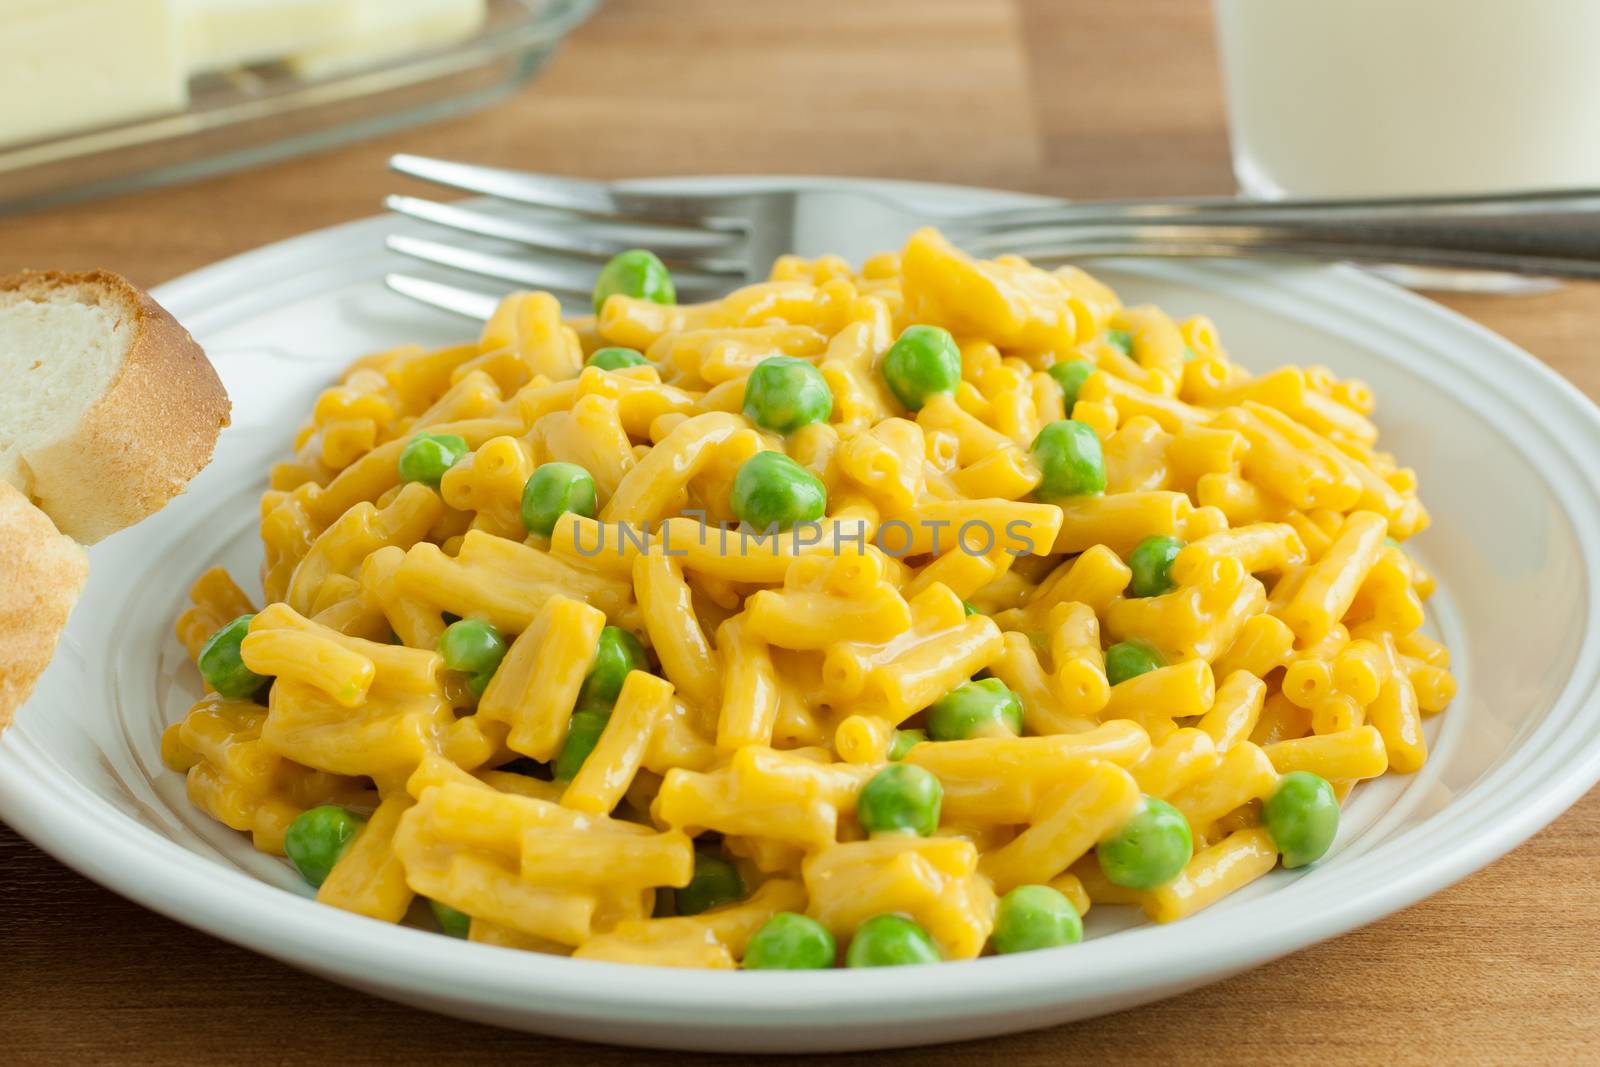 Mac and Cheese Dinner by SouthernLightStudios